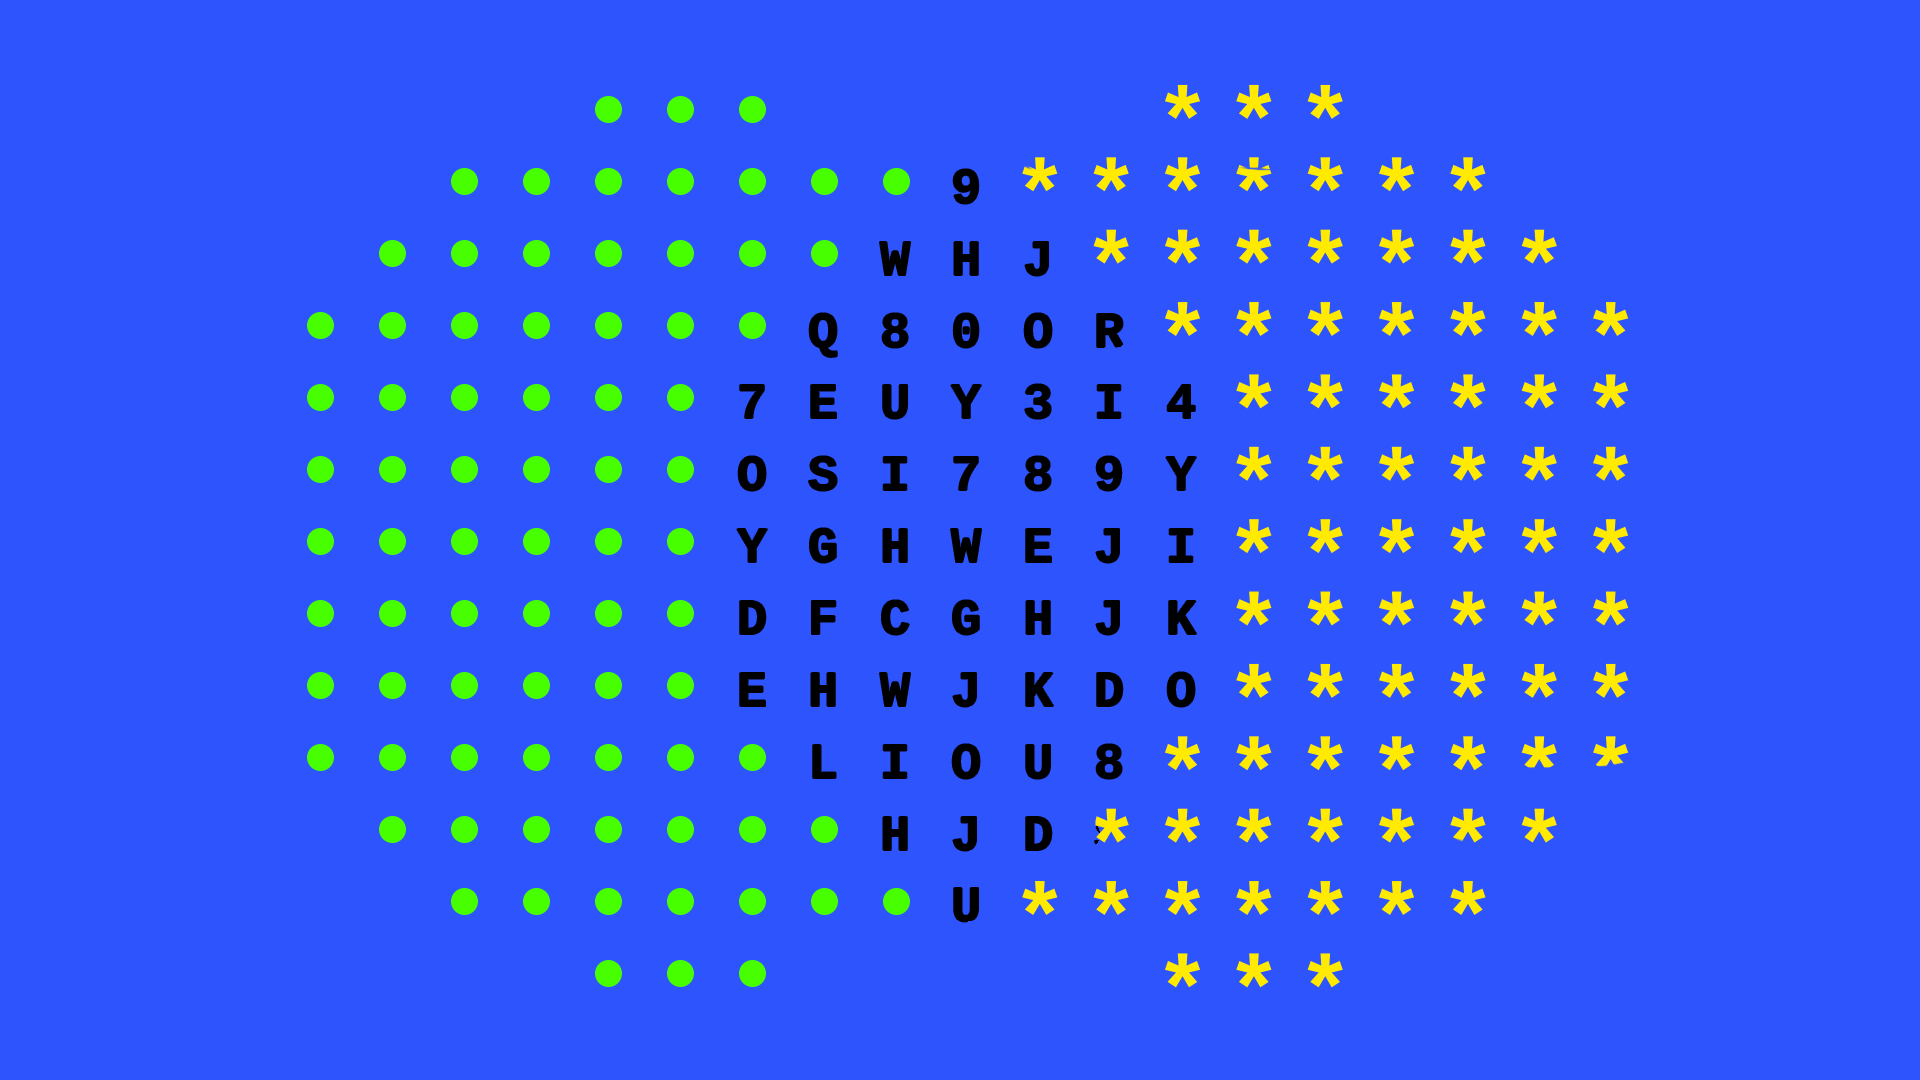 Illustration of encryption as an abstract eye made up of symbols and code